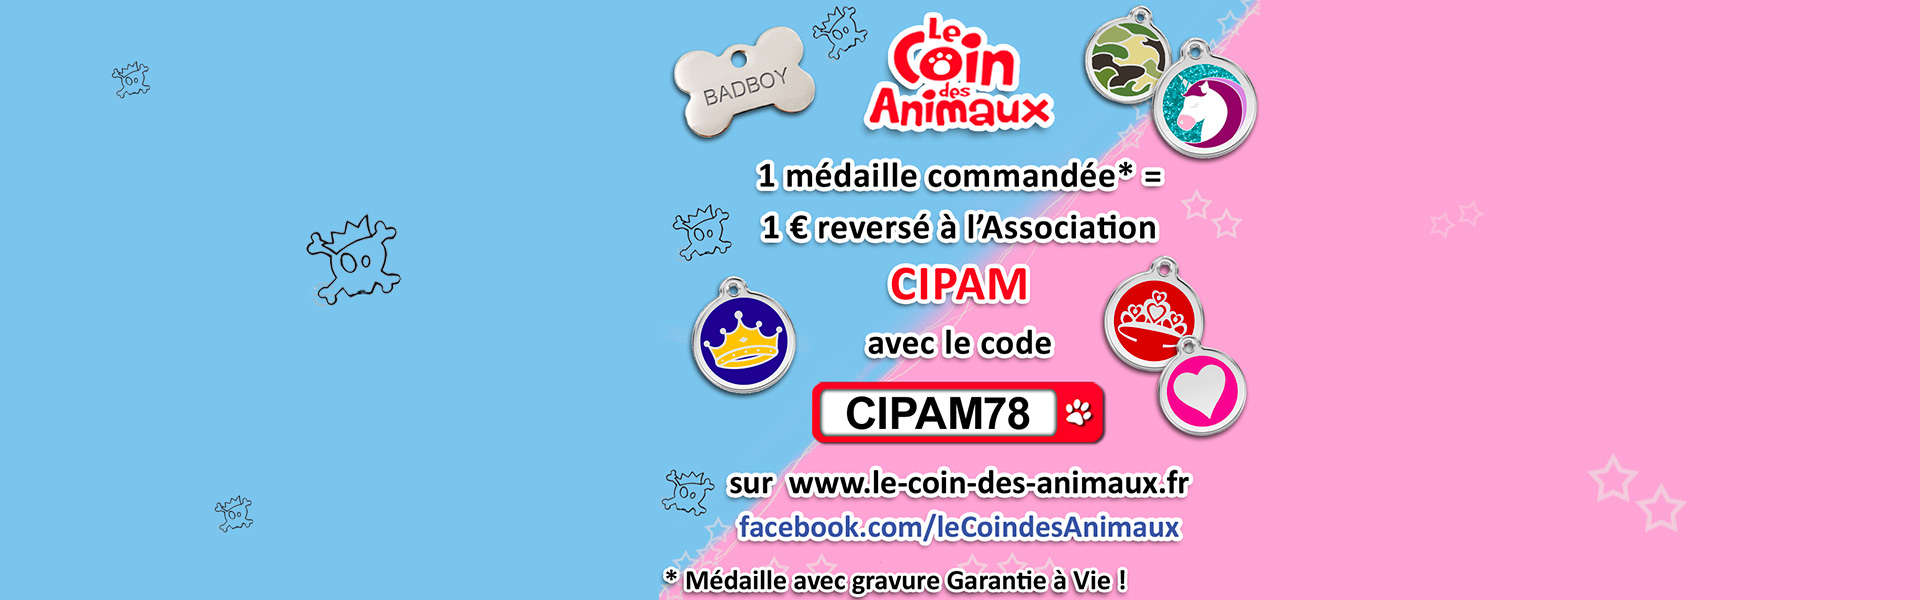 slide-coin-animaux